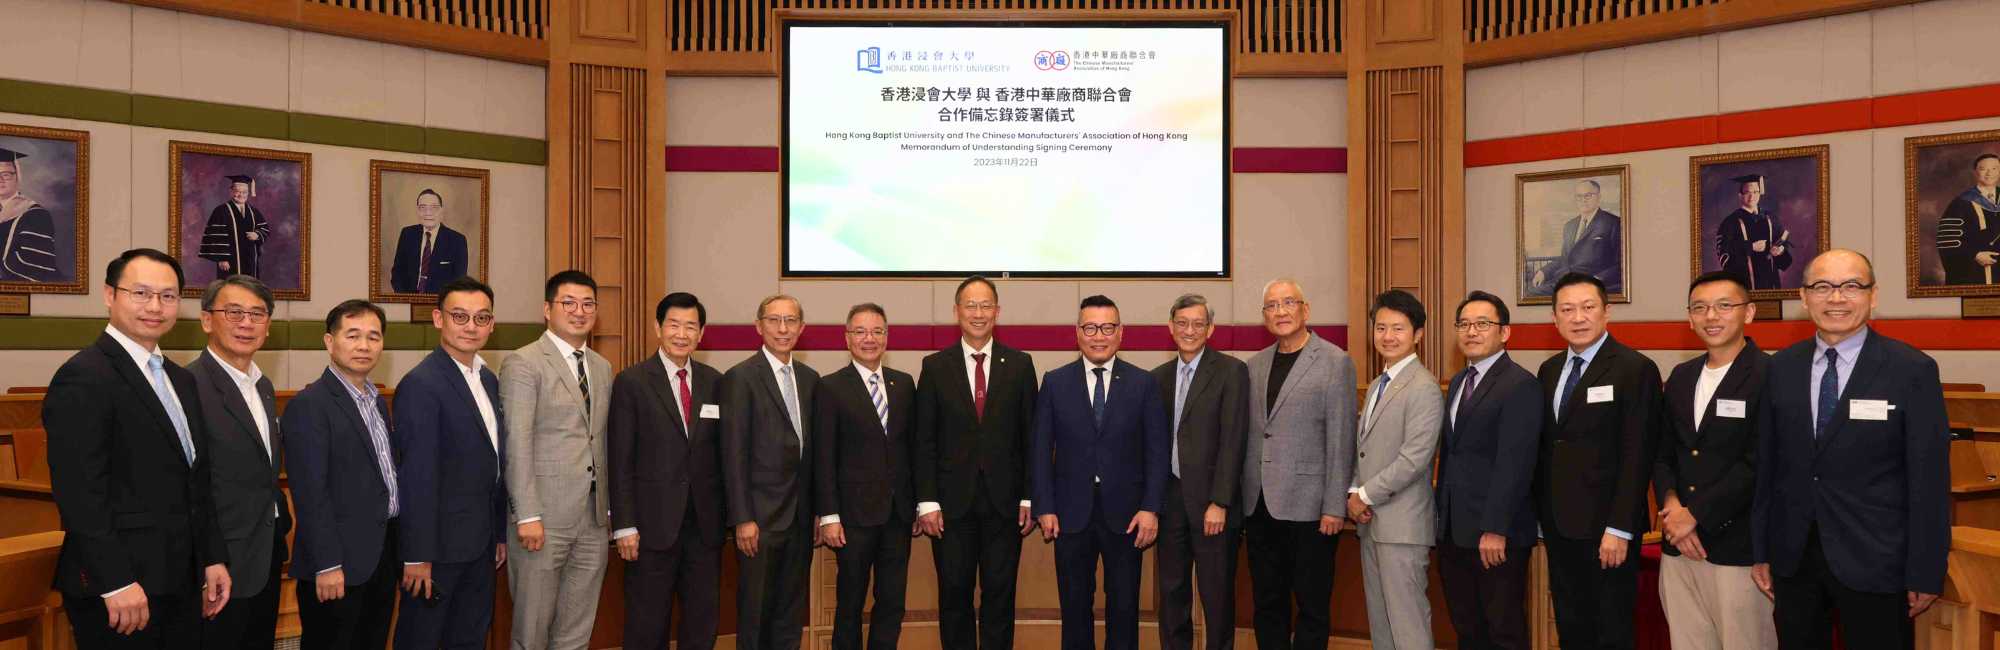 HKBU receives representatives from Consulate Generals in Hong Kong for knowledge transfer exchange